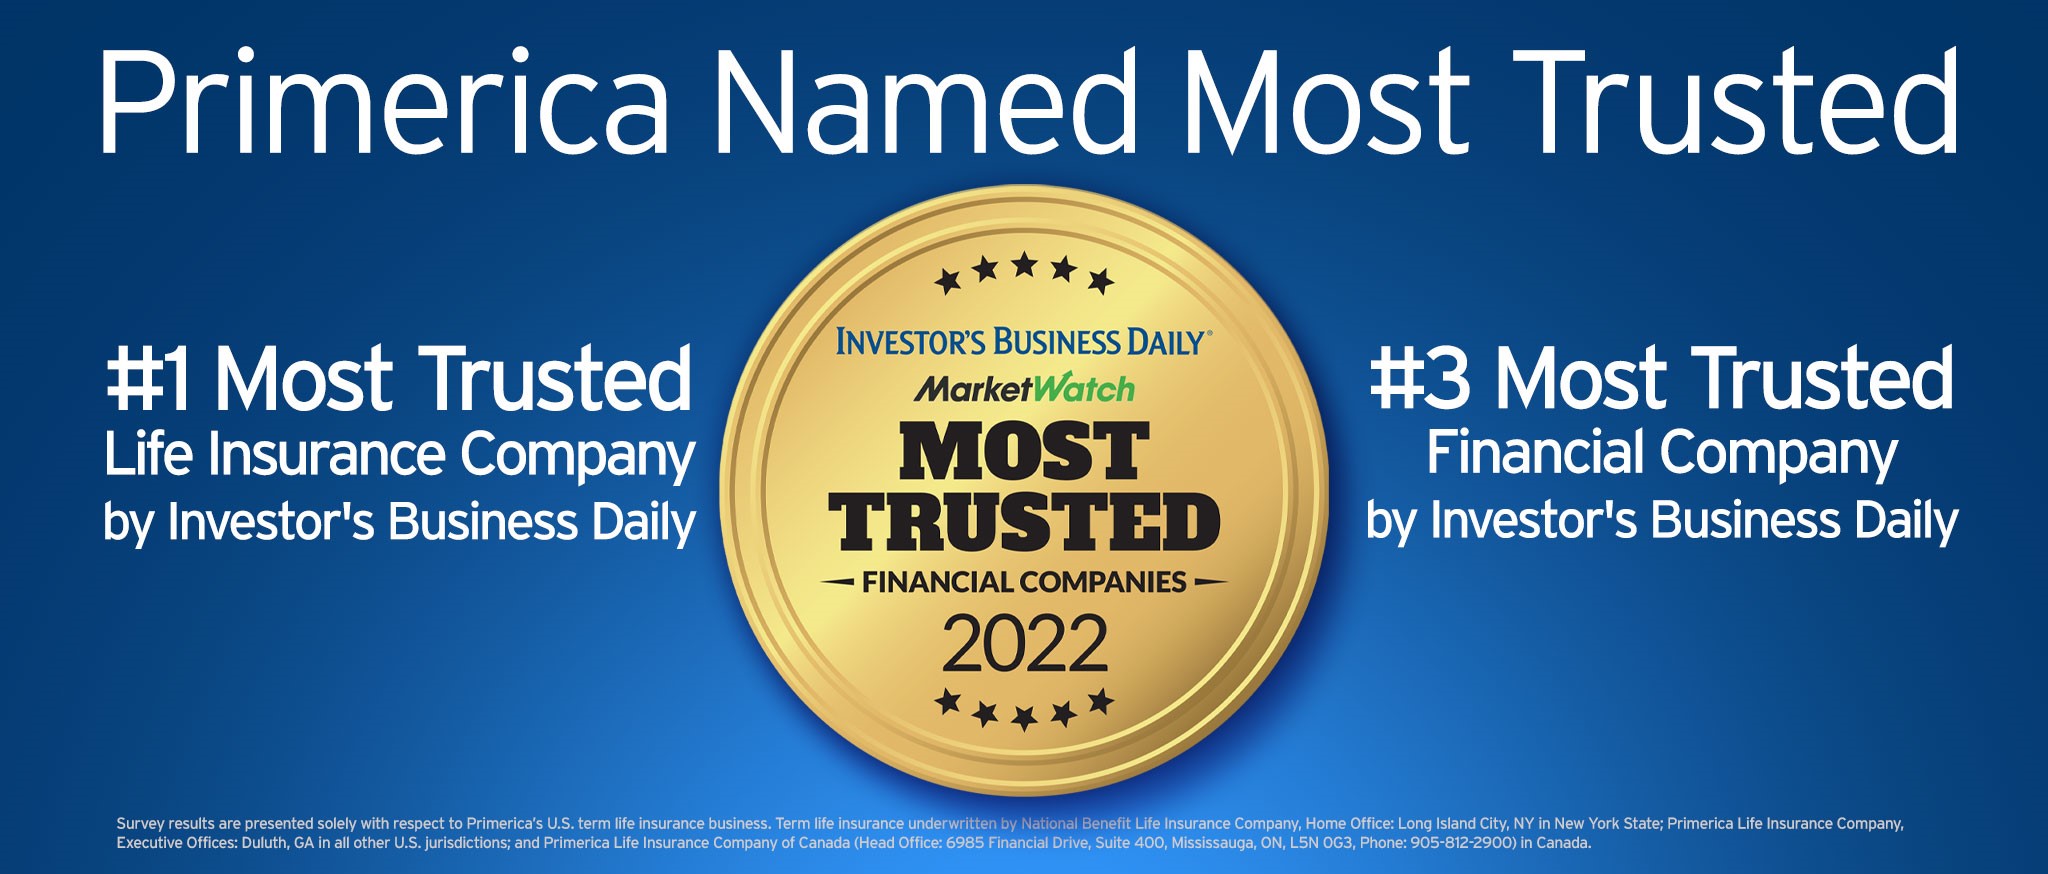 Primerica Named #1 Most Trusted Life Insurance Company by Investor's Business Daily and #3 Most Trusted Financial Company by Investor's Business Daily